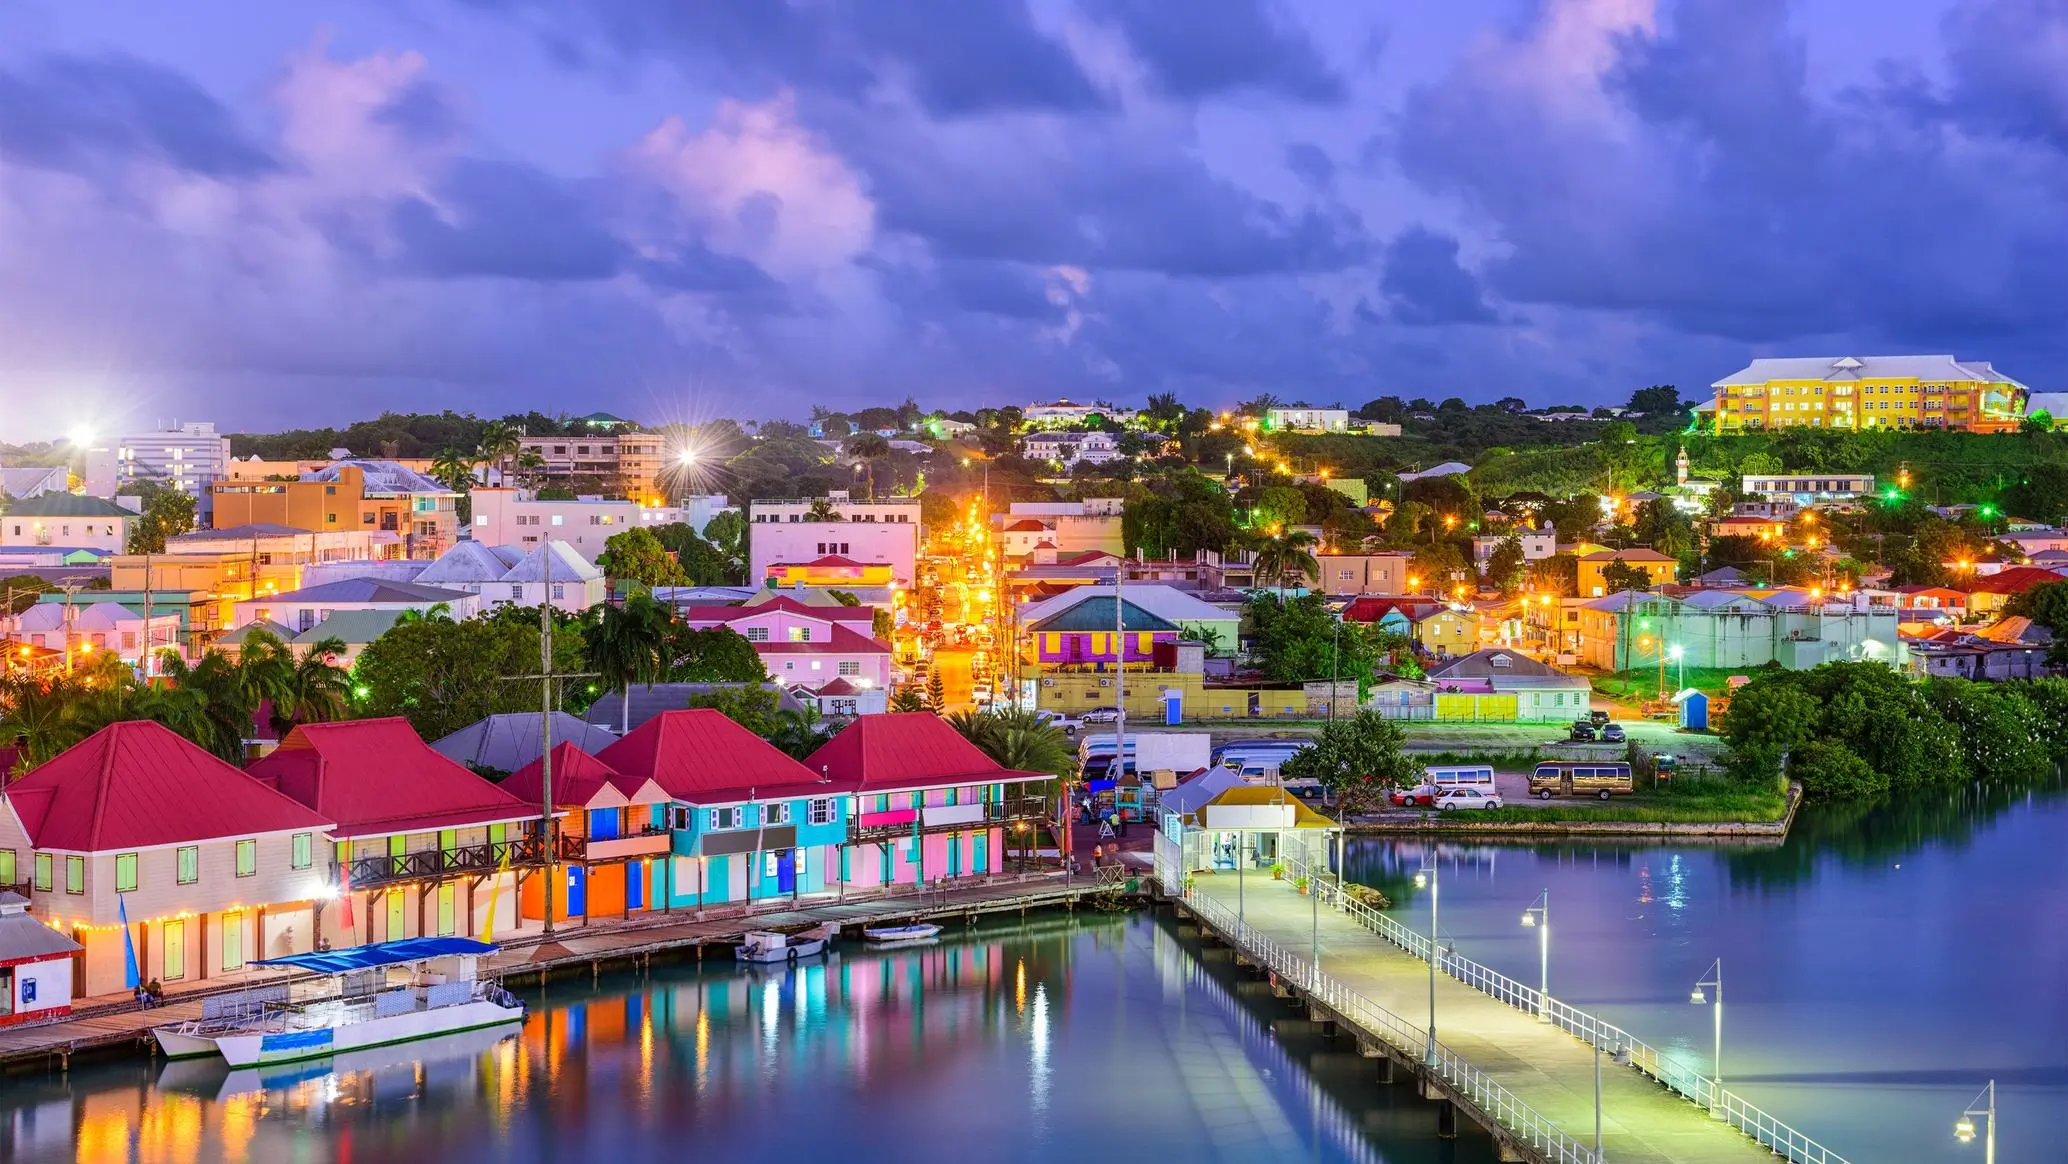 Antigua and Barbuda citizenship by investment